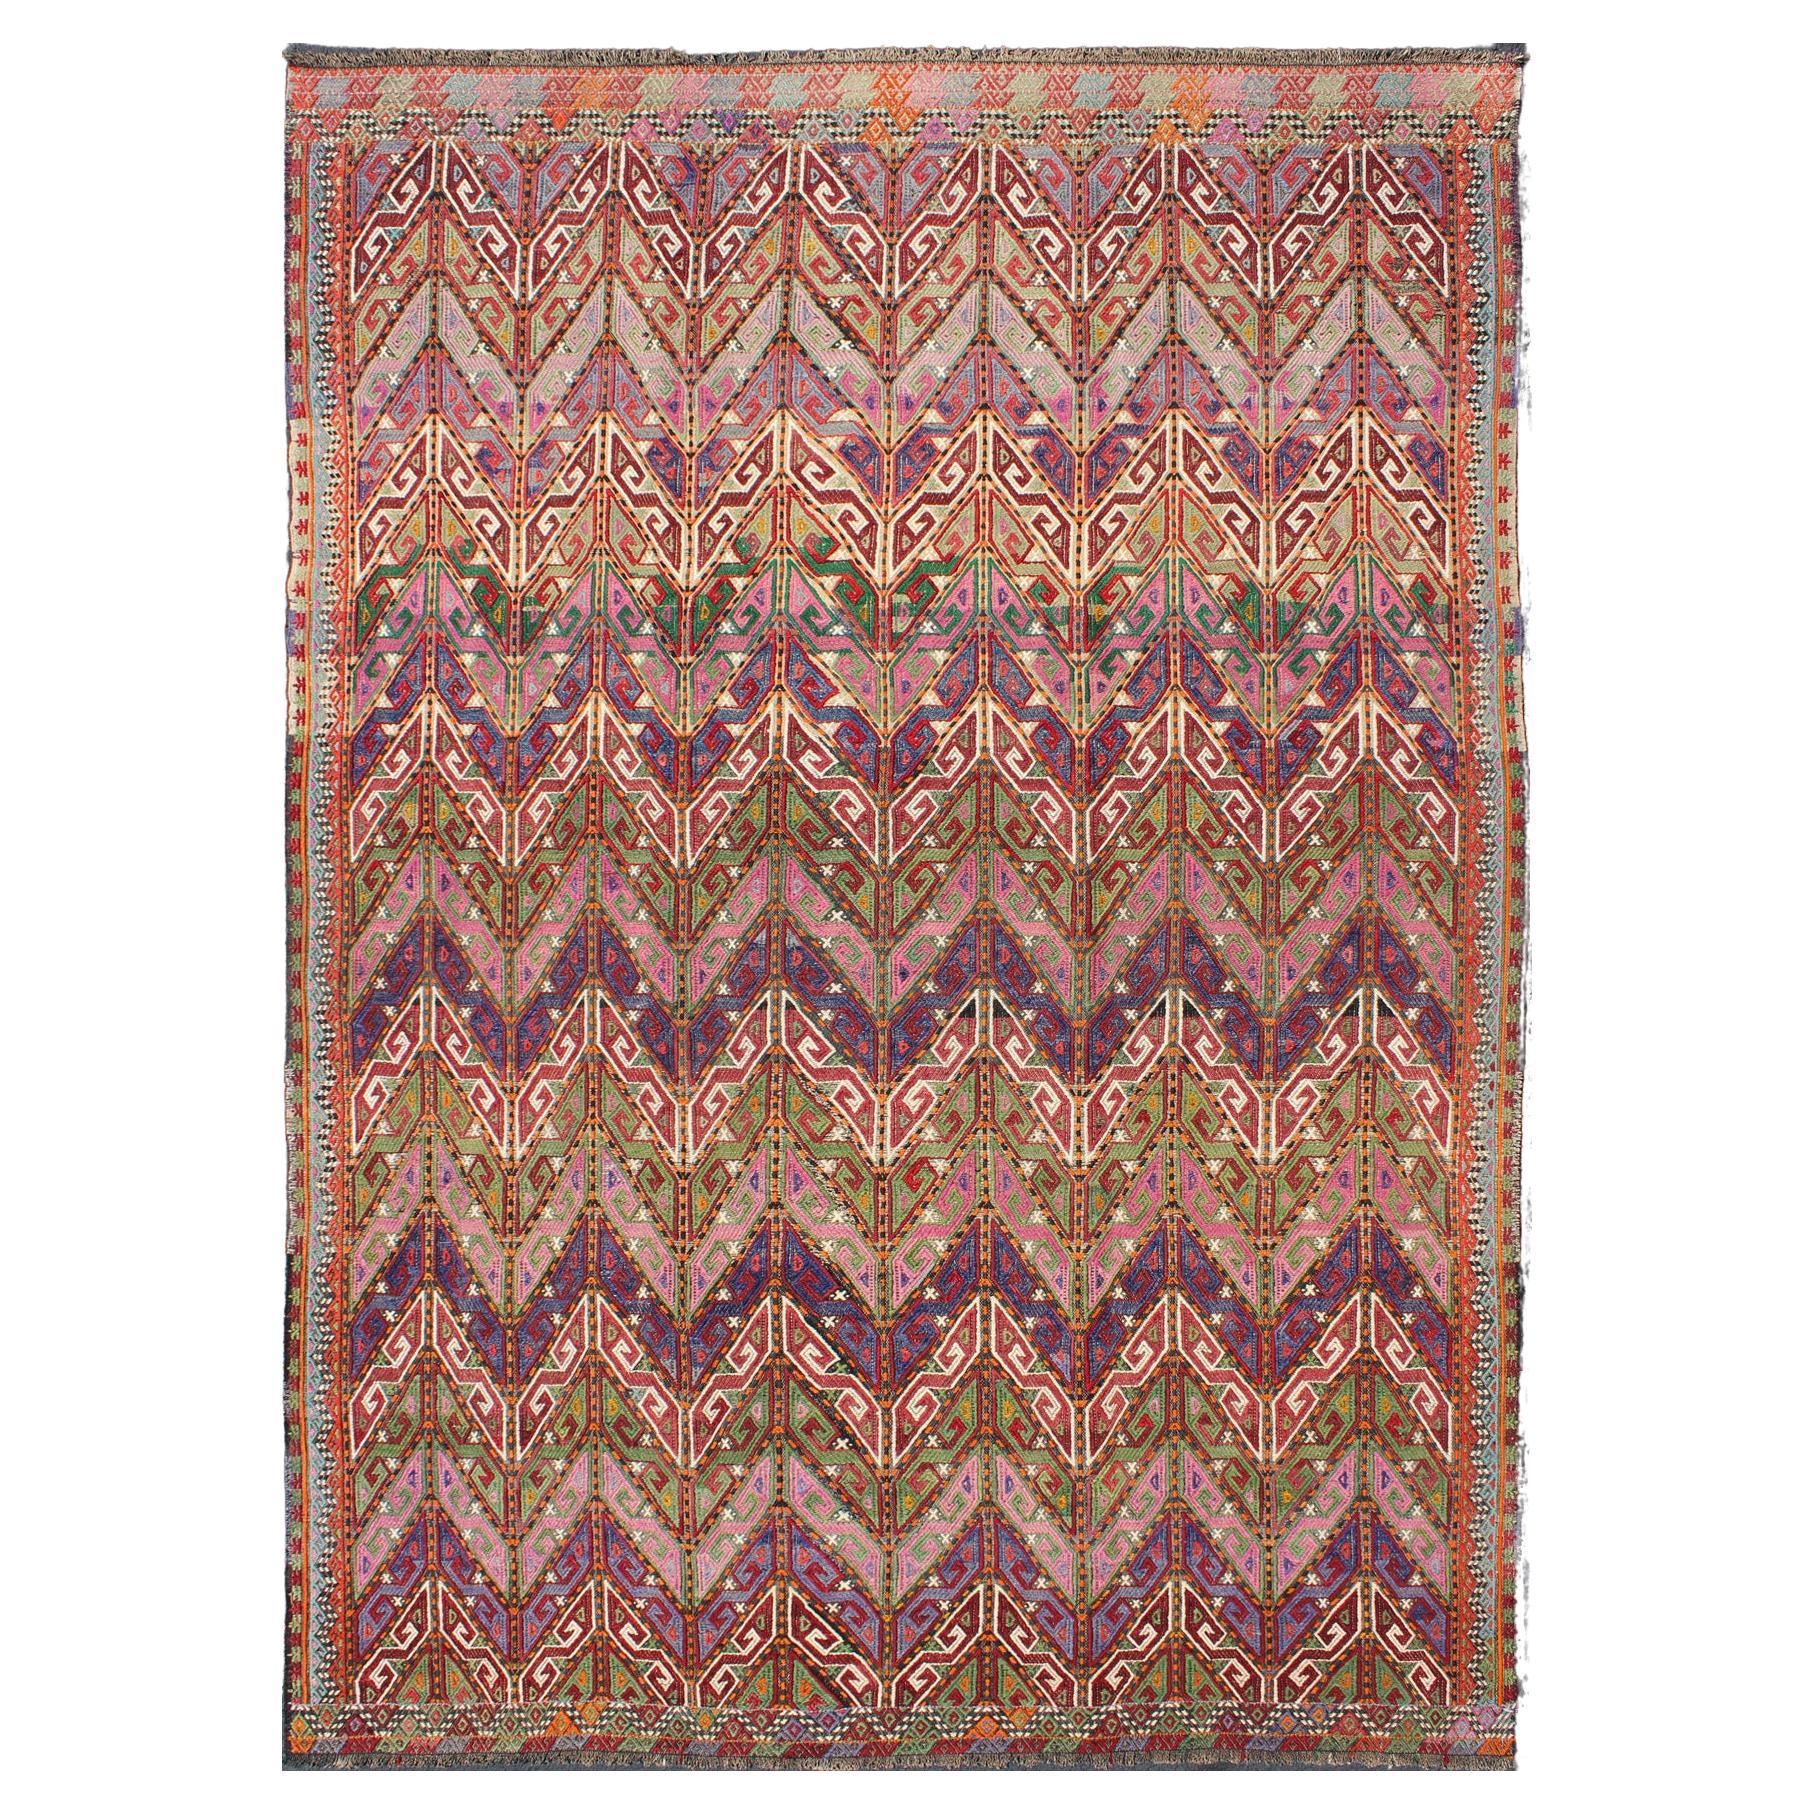 Colorful Vintage Turkish Embroidered Flat-Weave in Diamond design